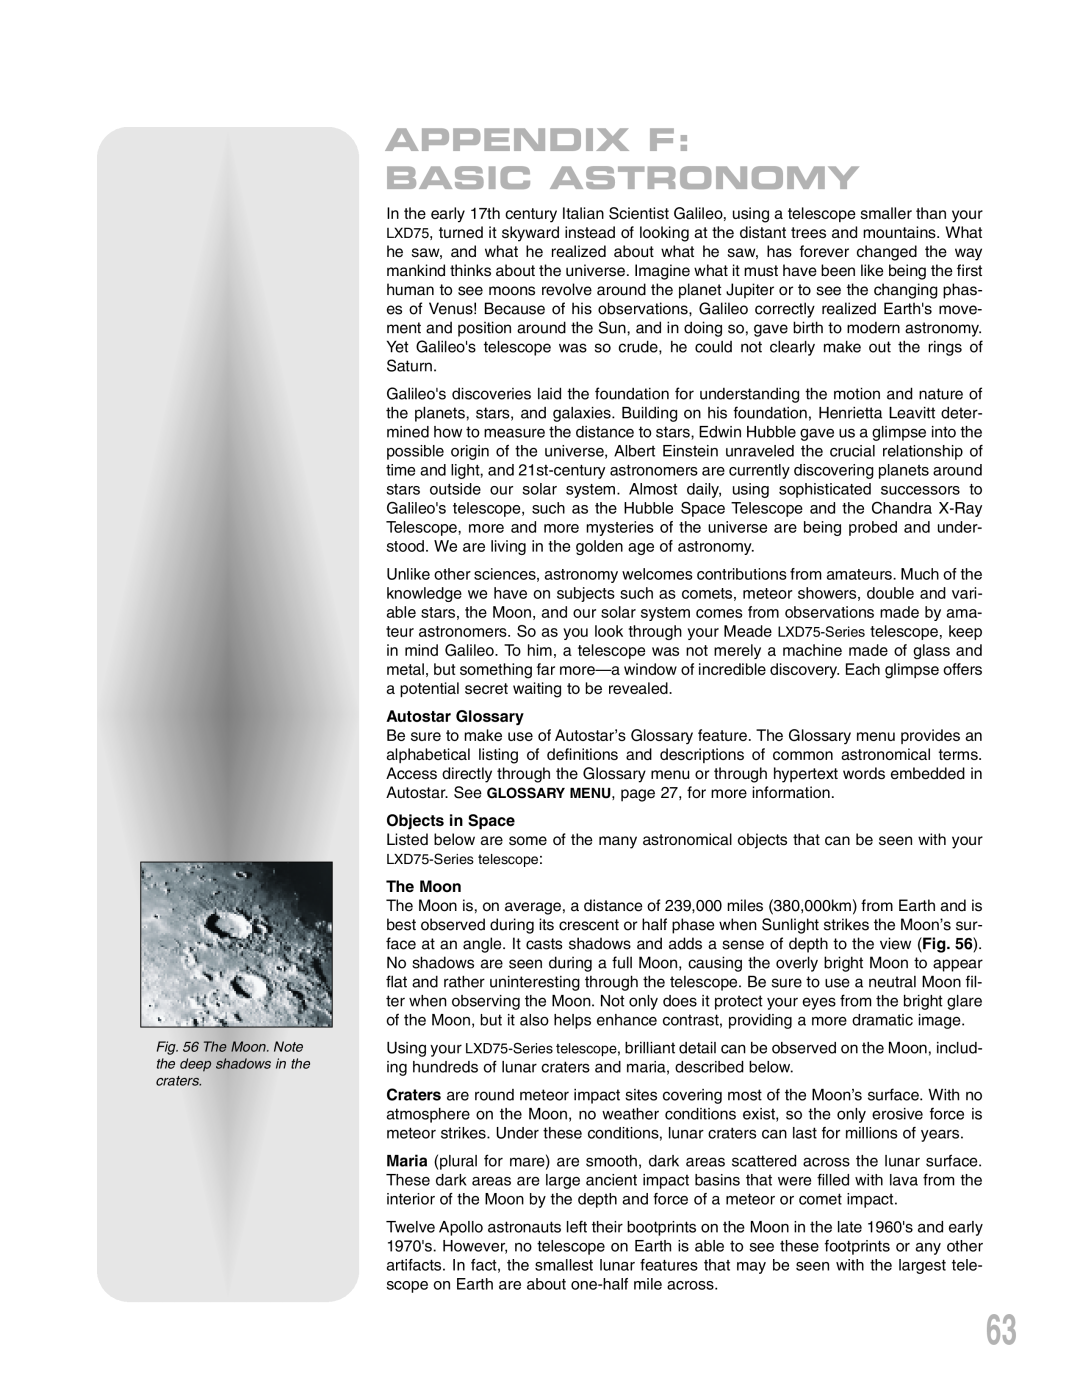 Meade LXD 75-Series instruction manual Appendix F: Basic Astronomy, Autostar Glossary, Objects in Space, The Moon 